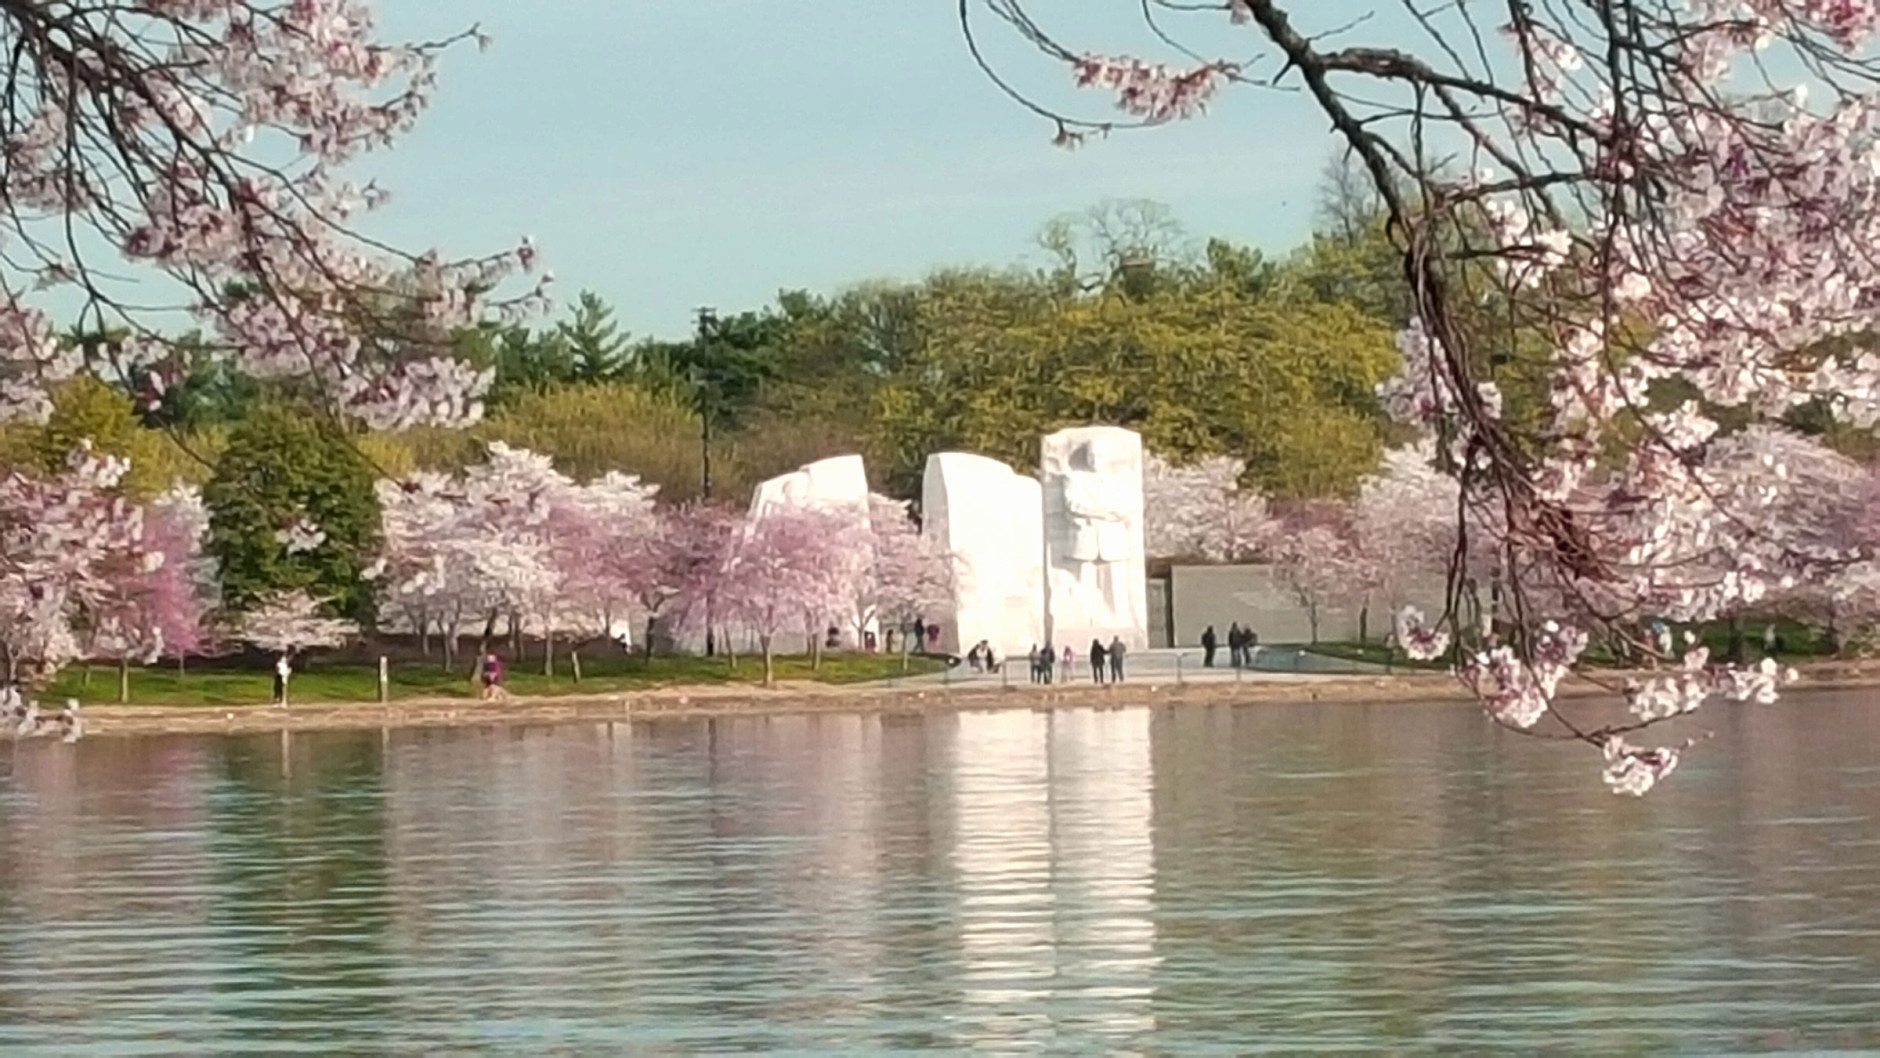 The cherry blossoms on March 23, 2016. (Mariarita Berman)